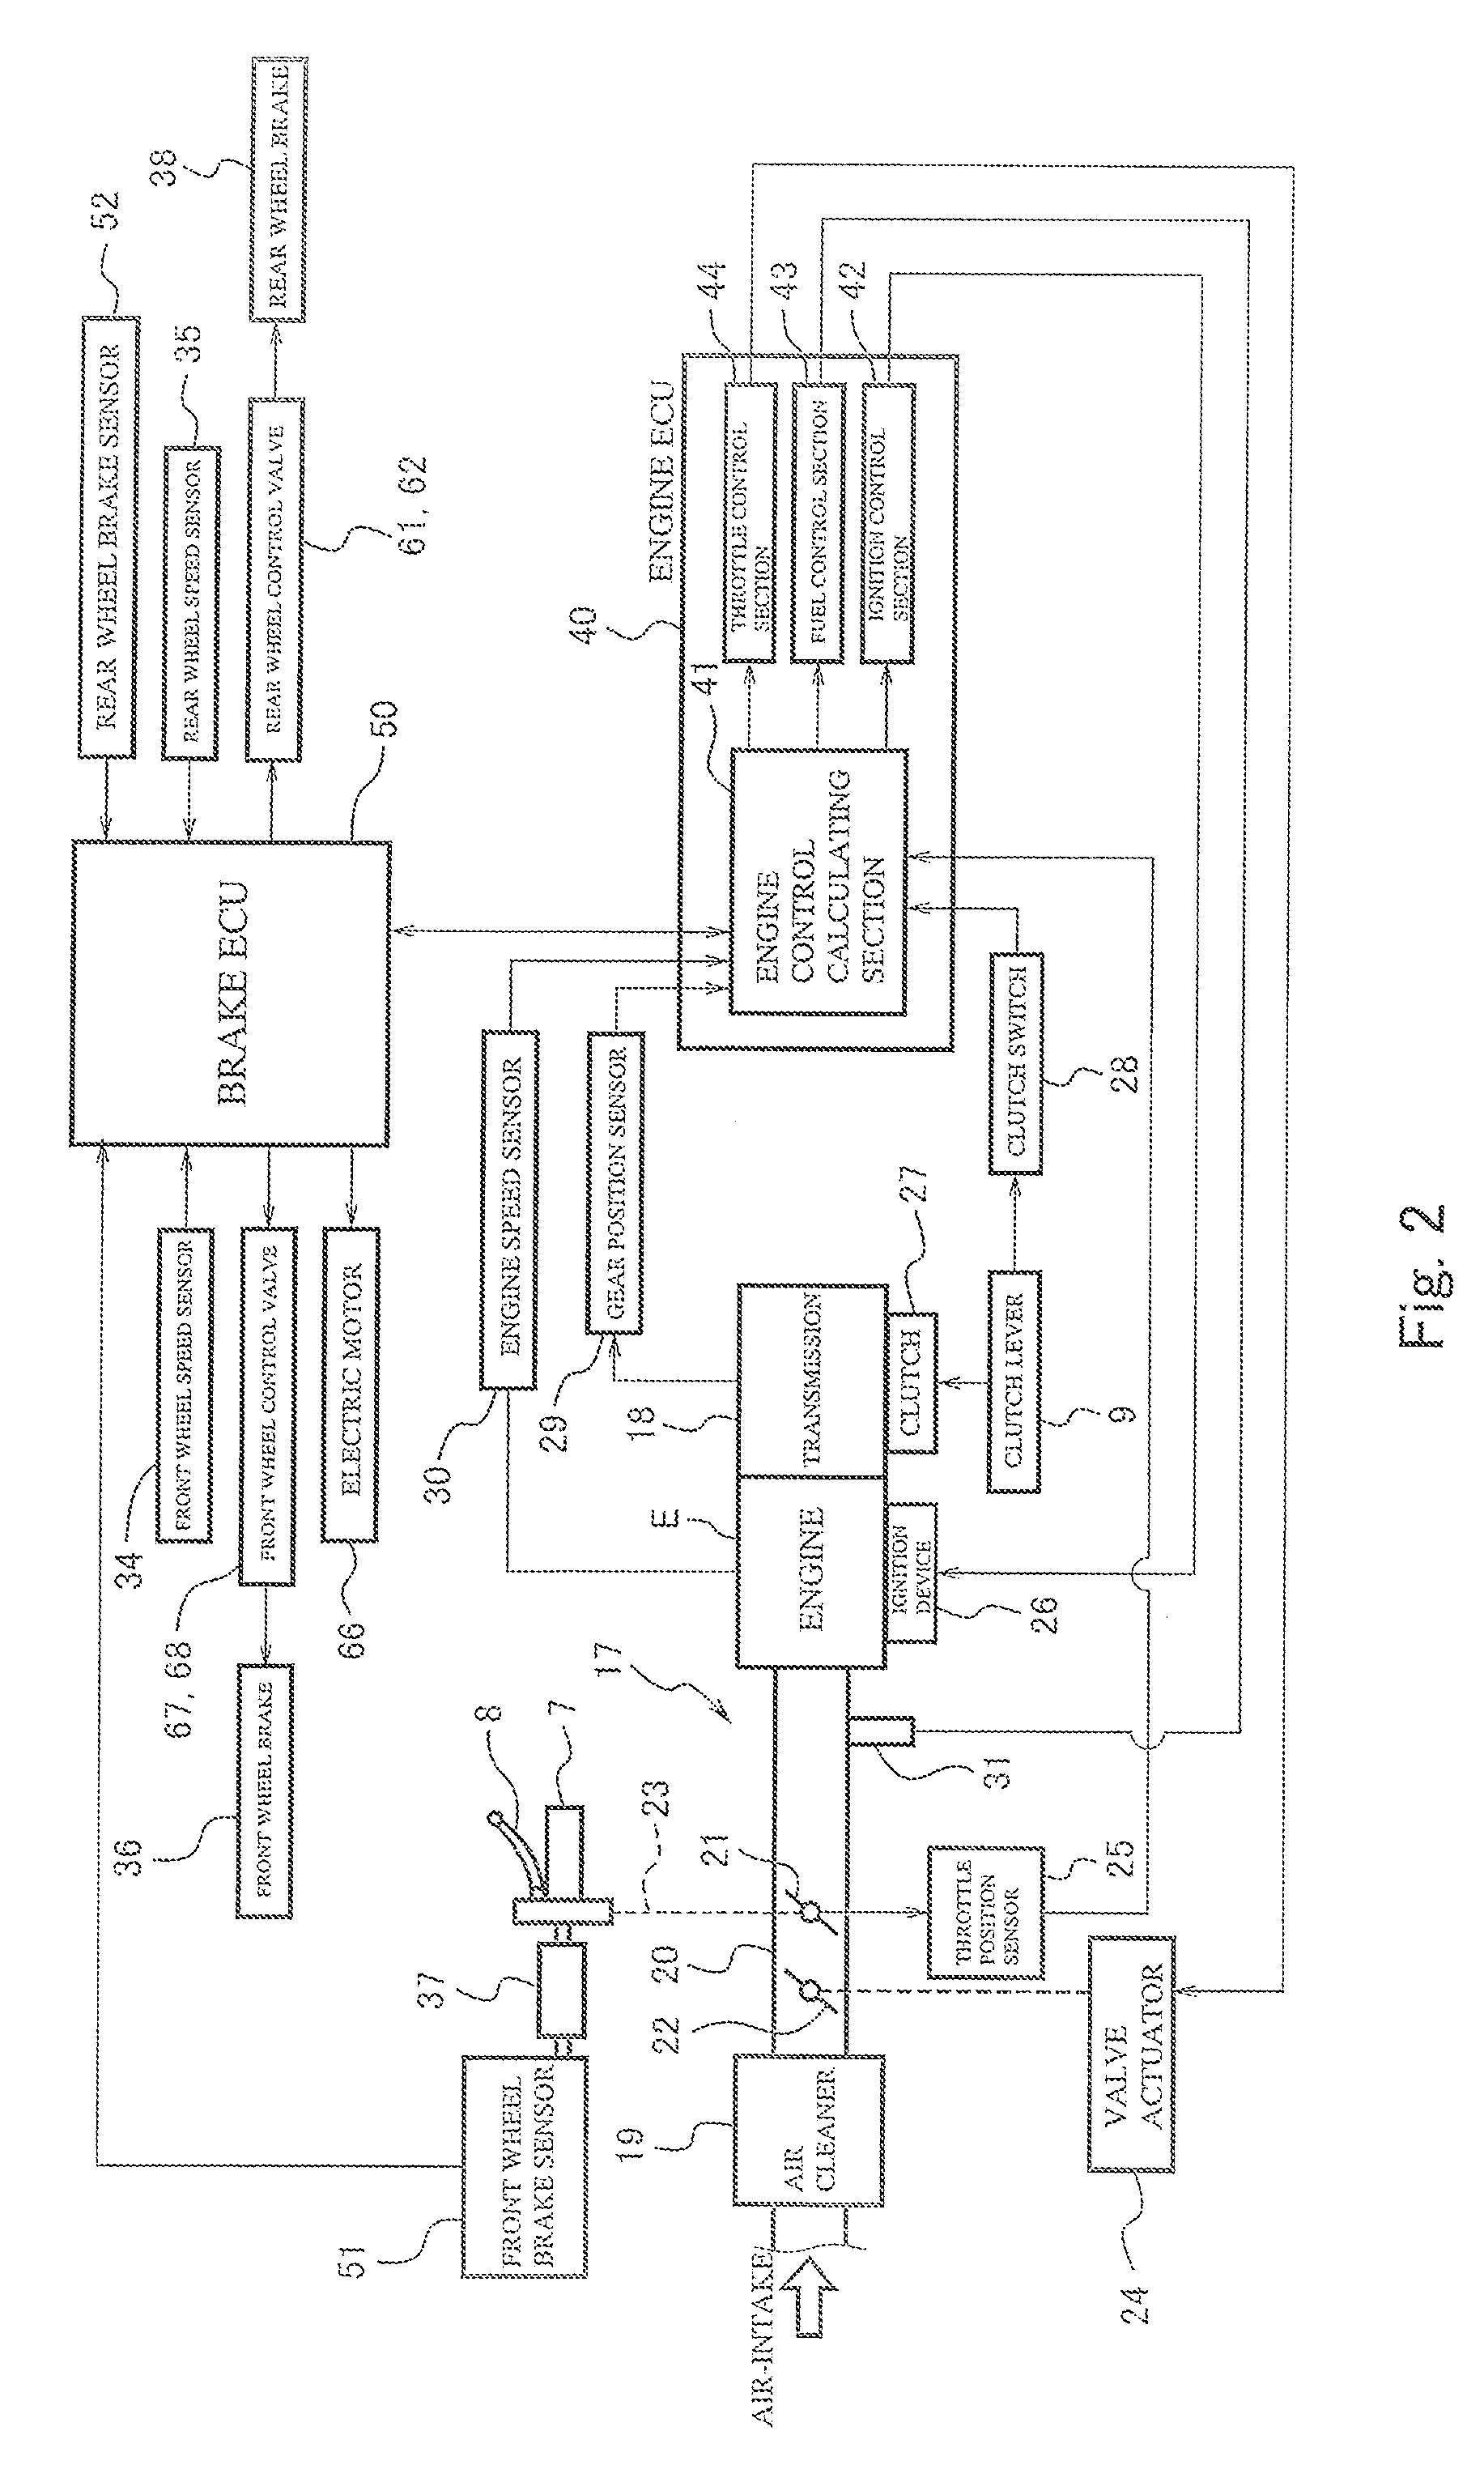 Brake control system in vehicle